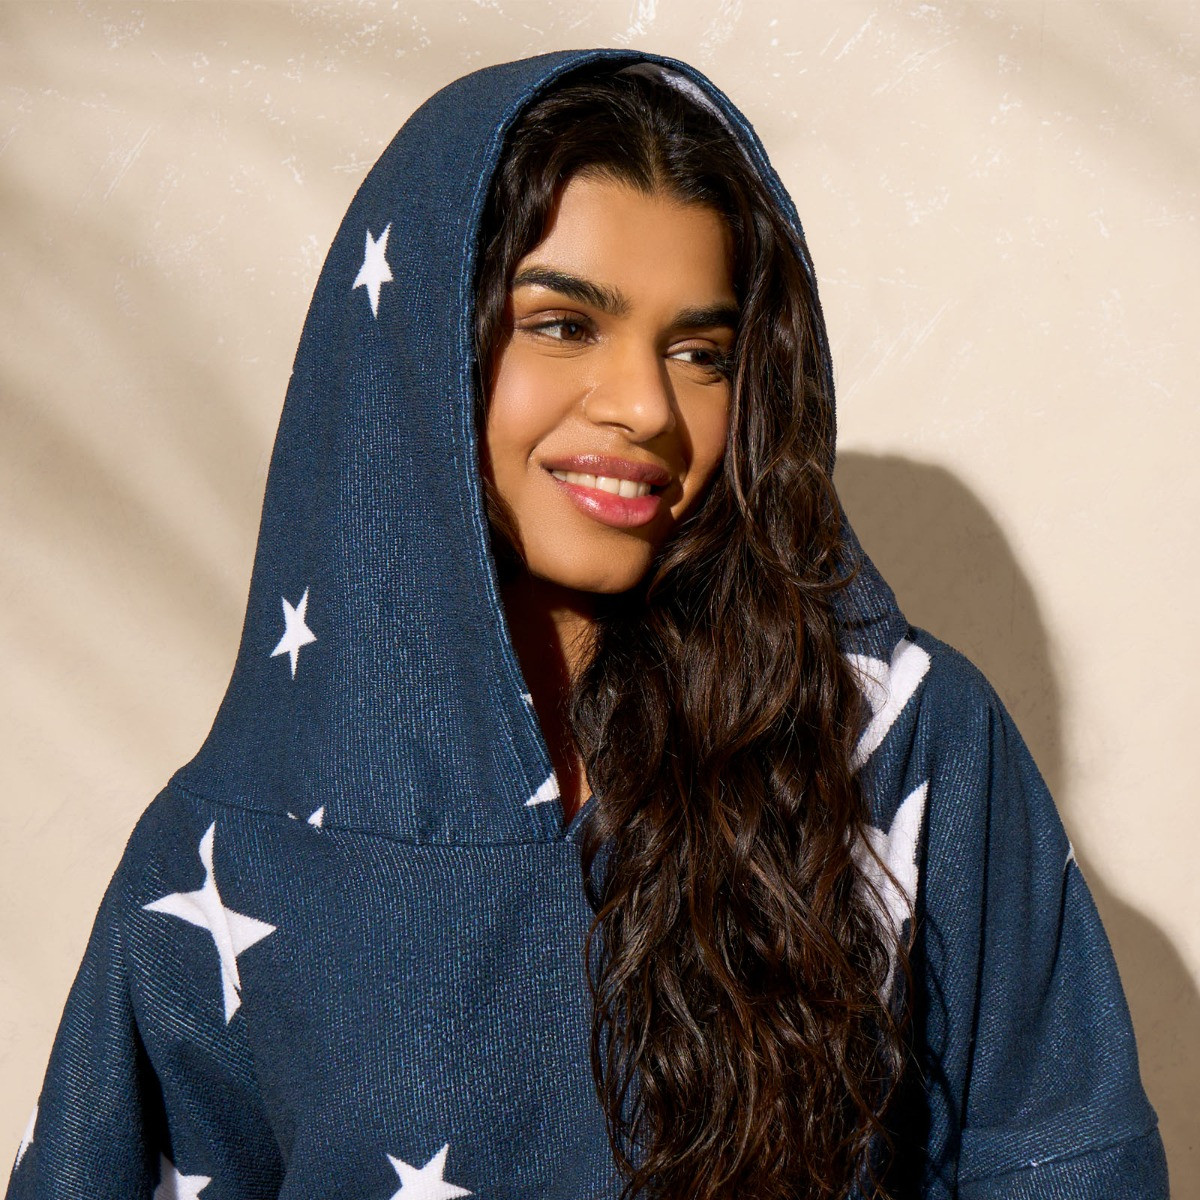 OHS Adult Towel Poncho Star Print - Navy Blue>